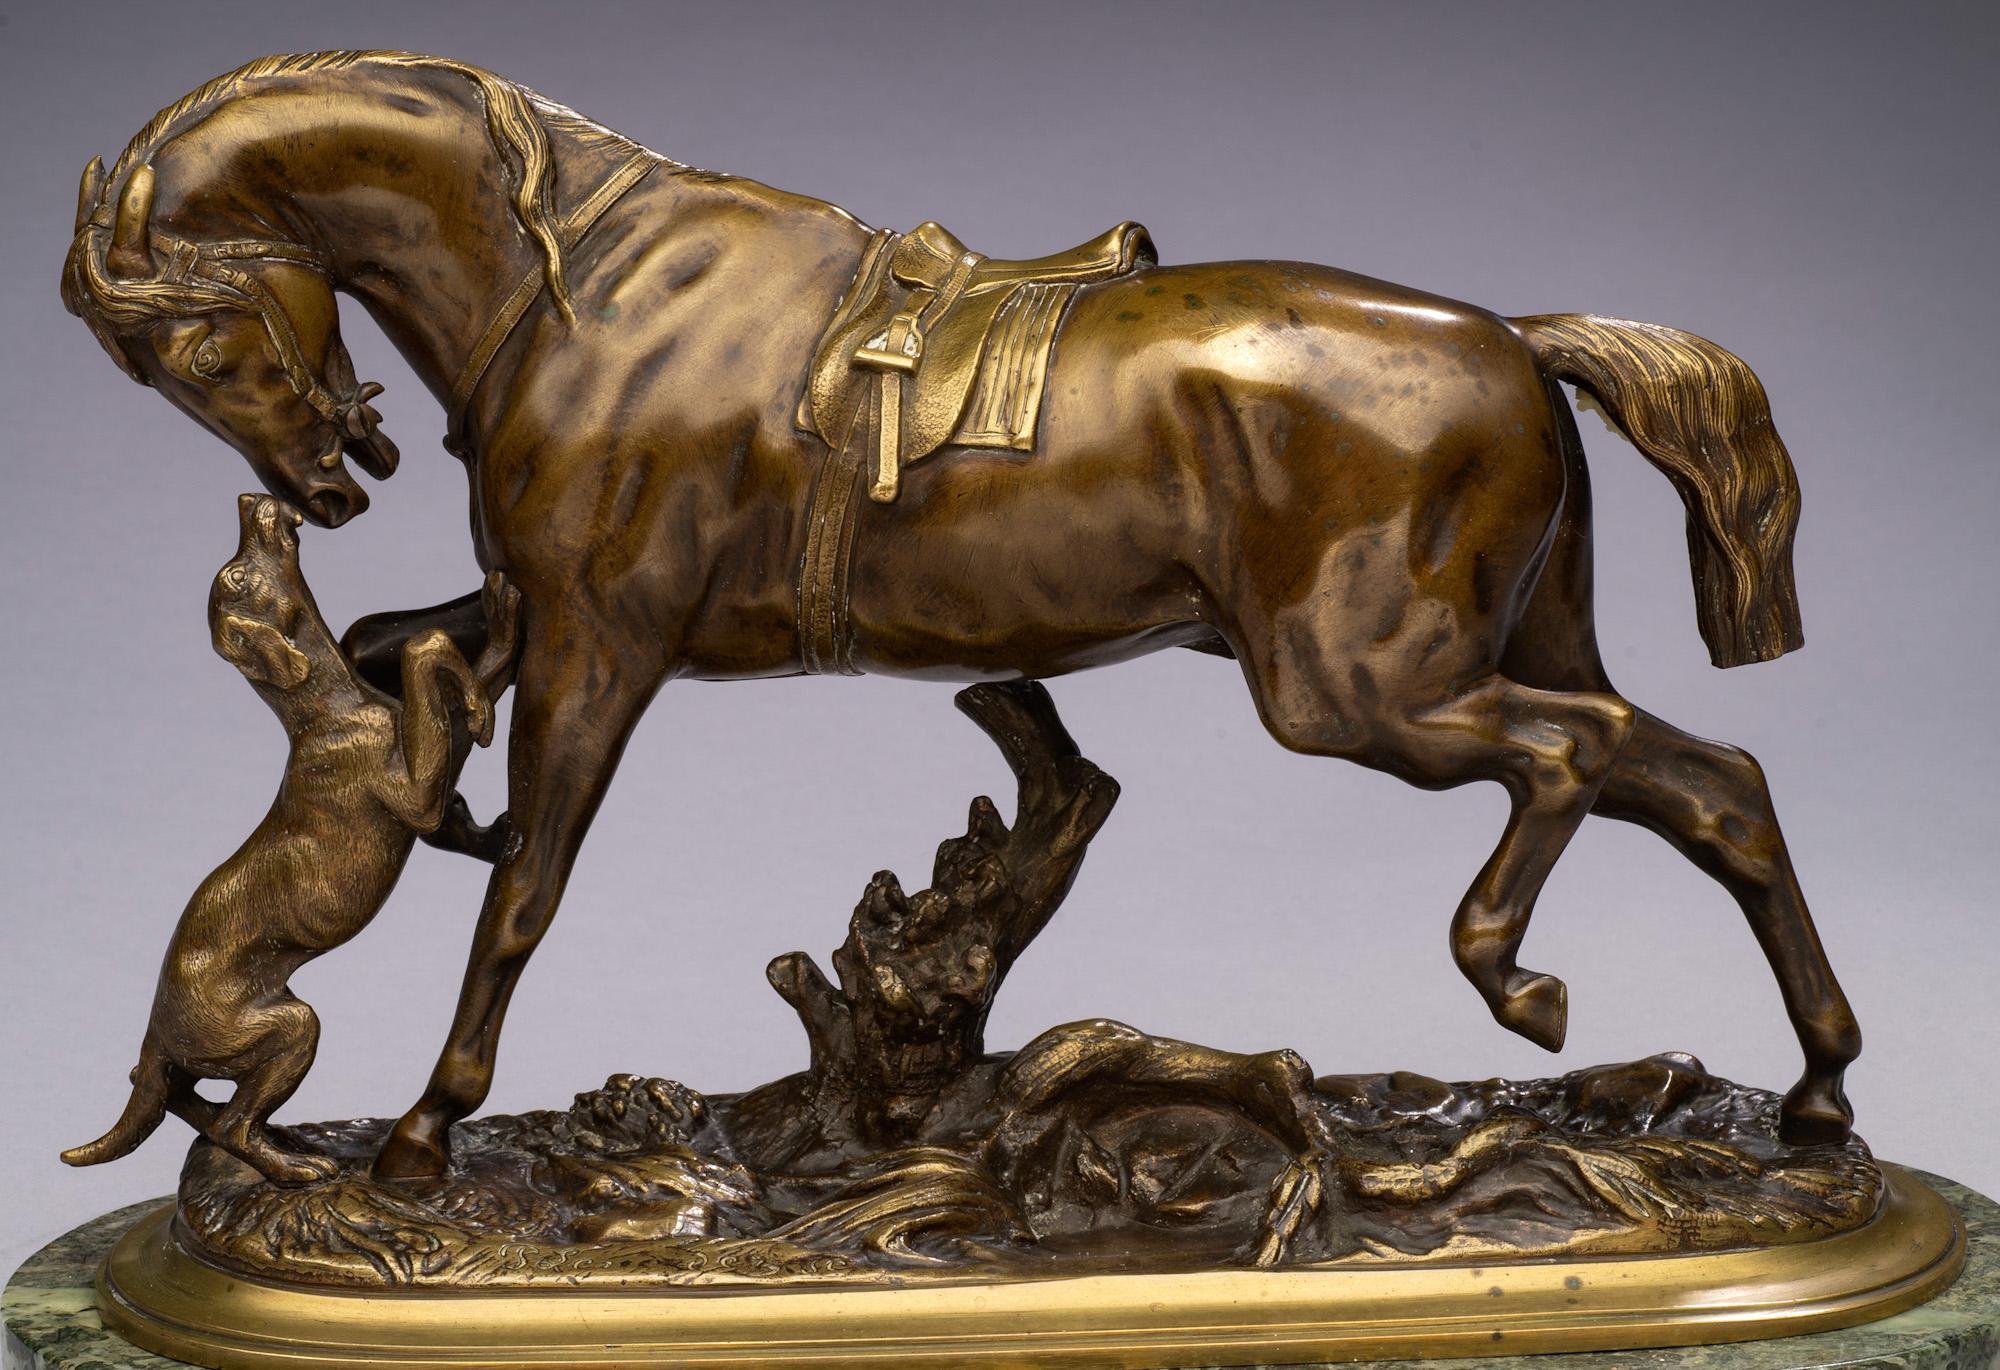 Antique Horse Bronze
"Saddled Horse Playing with a Dog" 
Pierre Lenordez (1815-1892) 
Bronze, circa 1860
11 x 7 inches

Painter and sculptor, professor at the Academy of Fine Arts in the city of Caen, Pierre Lenordez was born in 1815 in Vaast, in